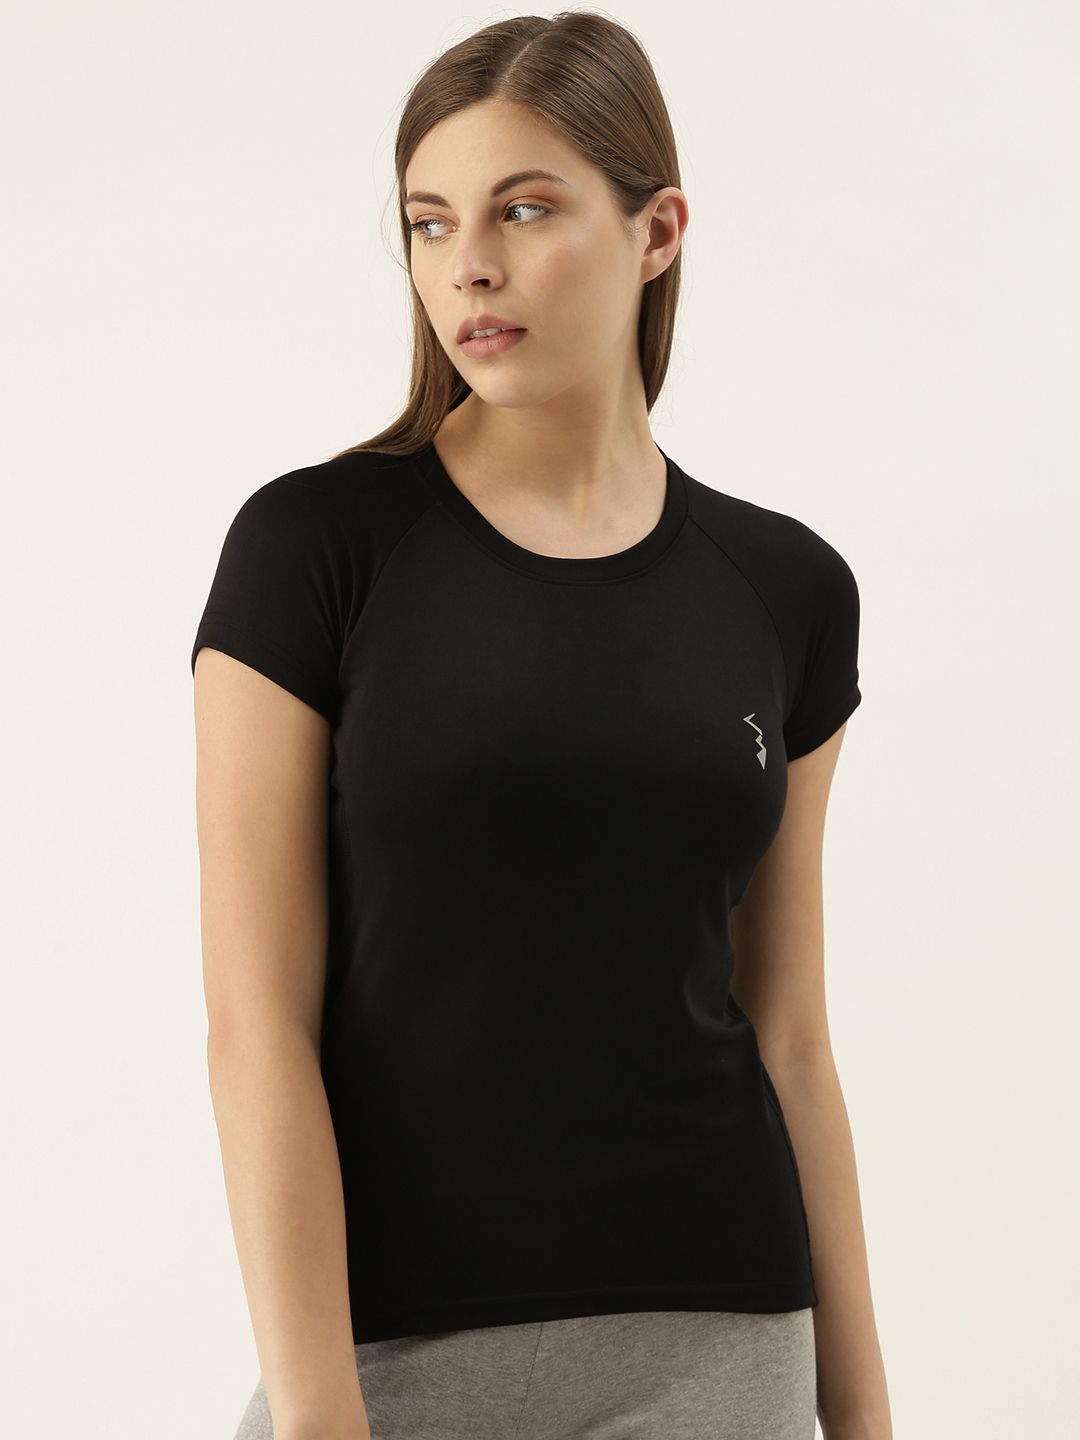 Campus Sutra Women Black Solid Round Neck Rapid-Dry Training T-shirt Price in India